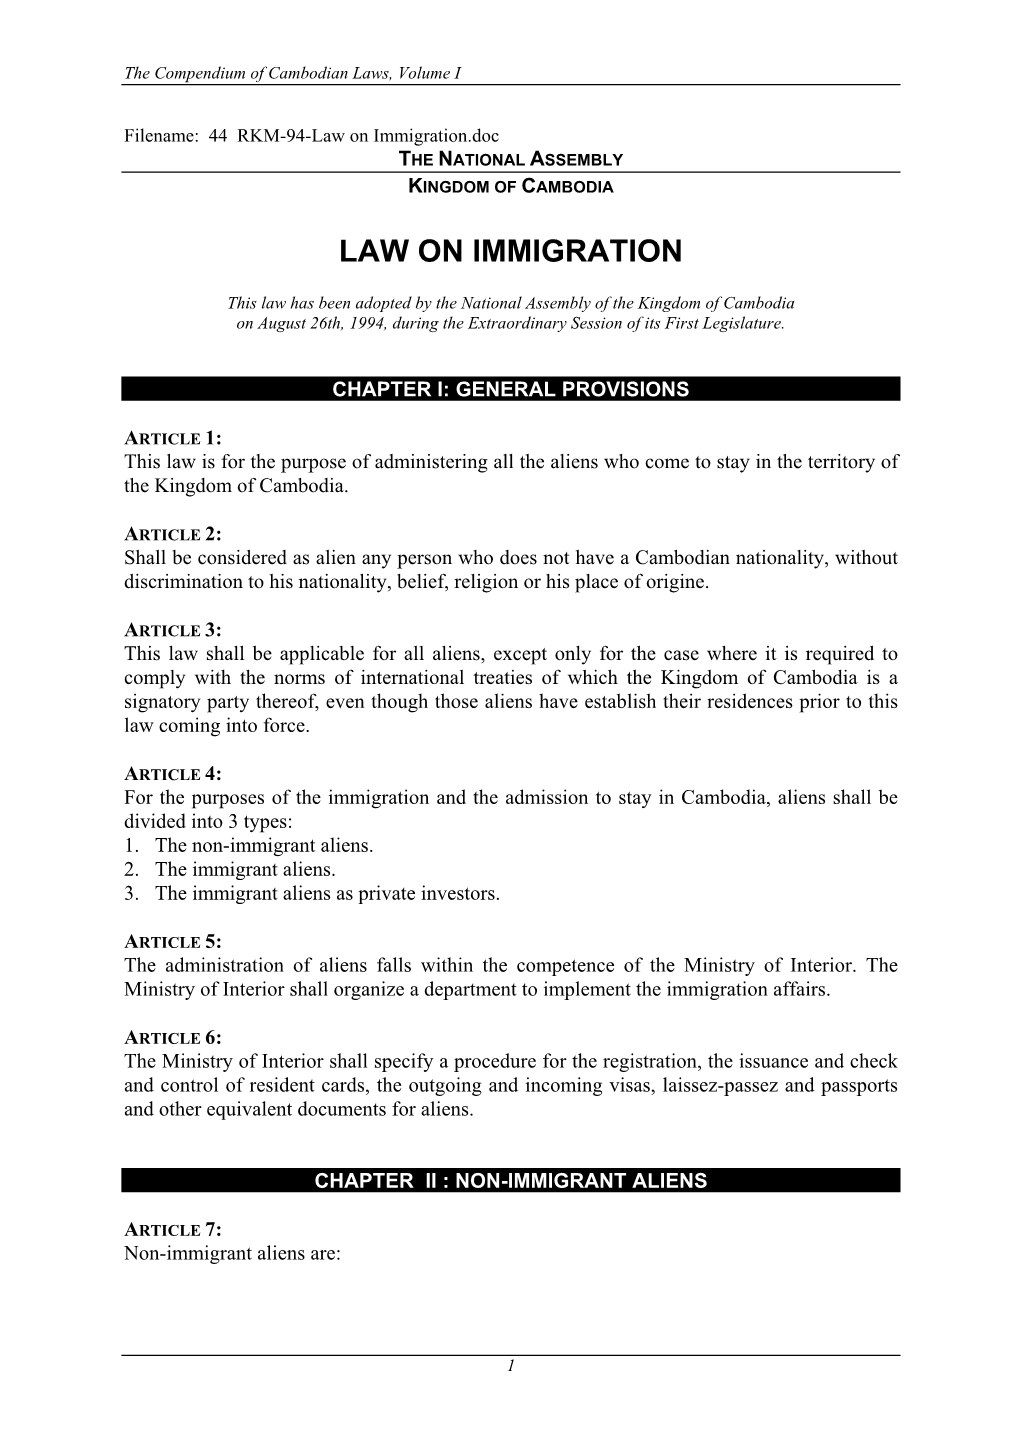 Law on Immigration.Doc the NATIONAL ASSEMBLY KINGDOM of CAMBODIA